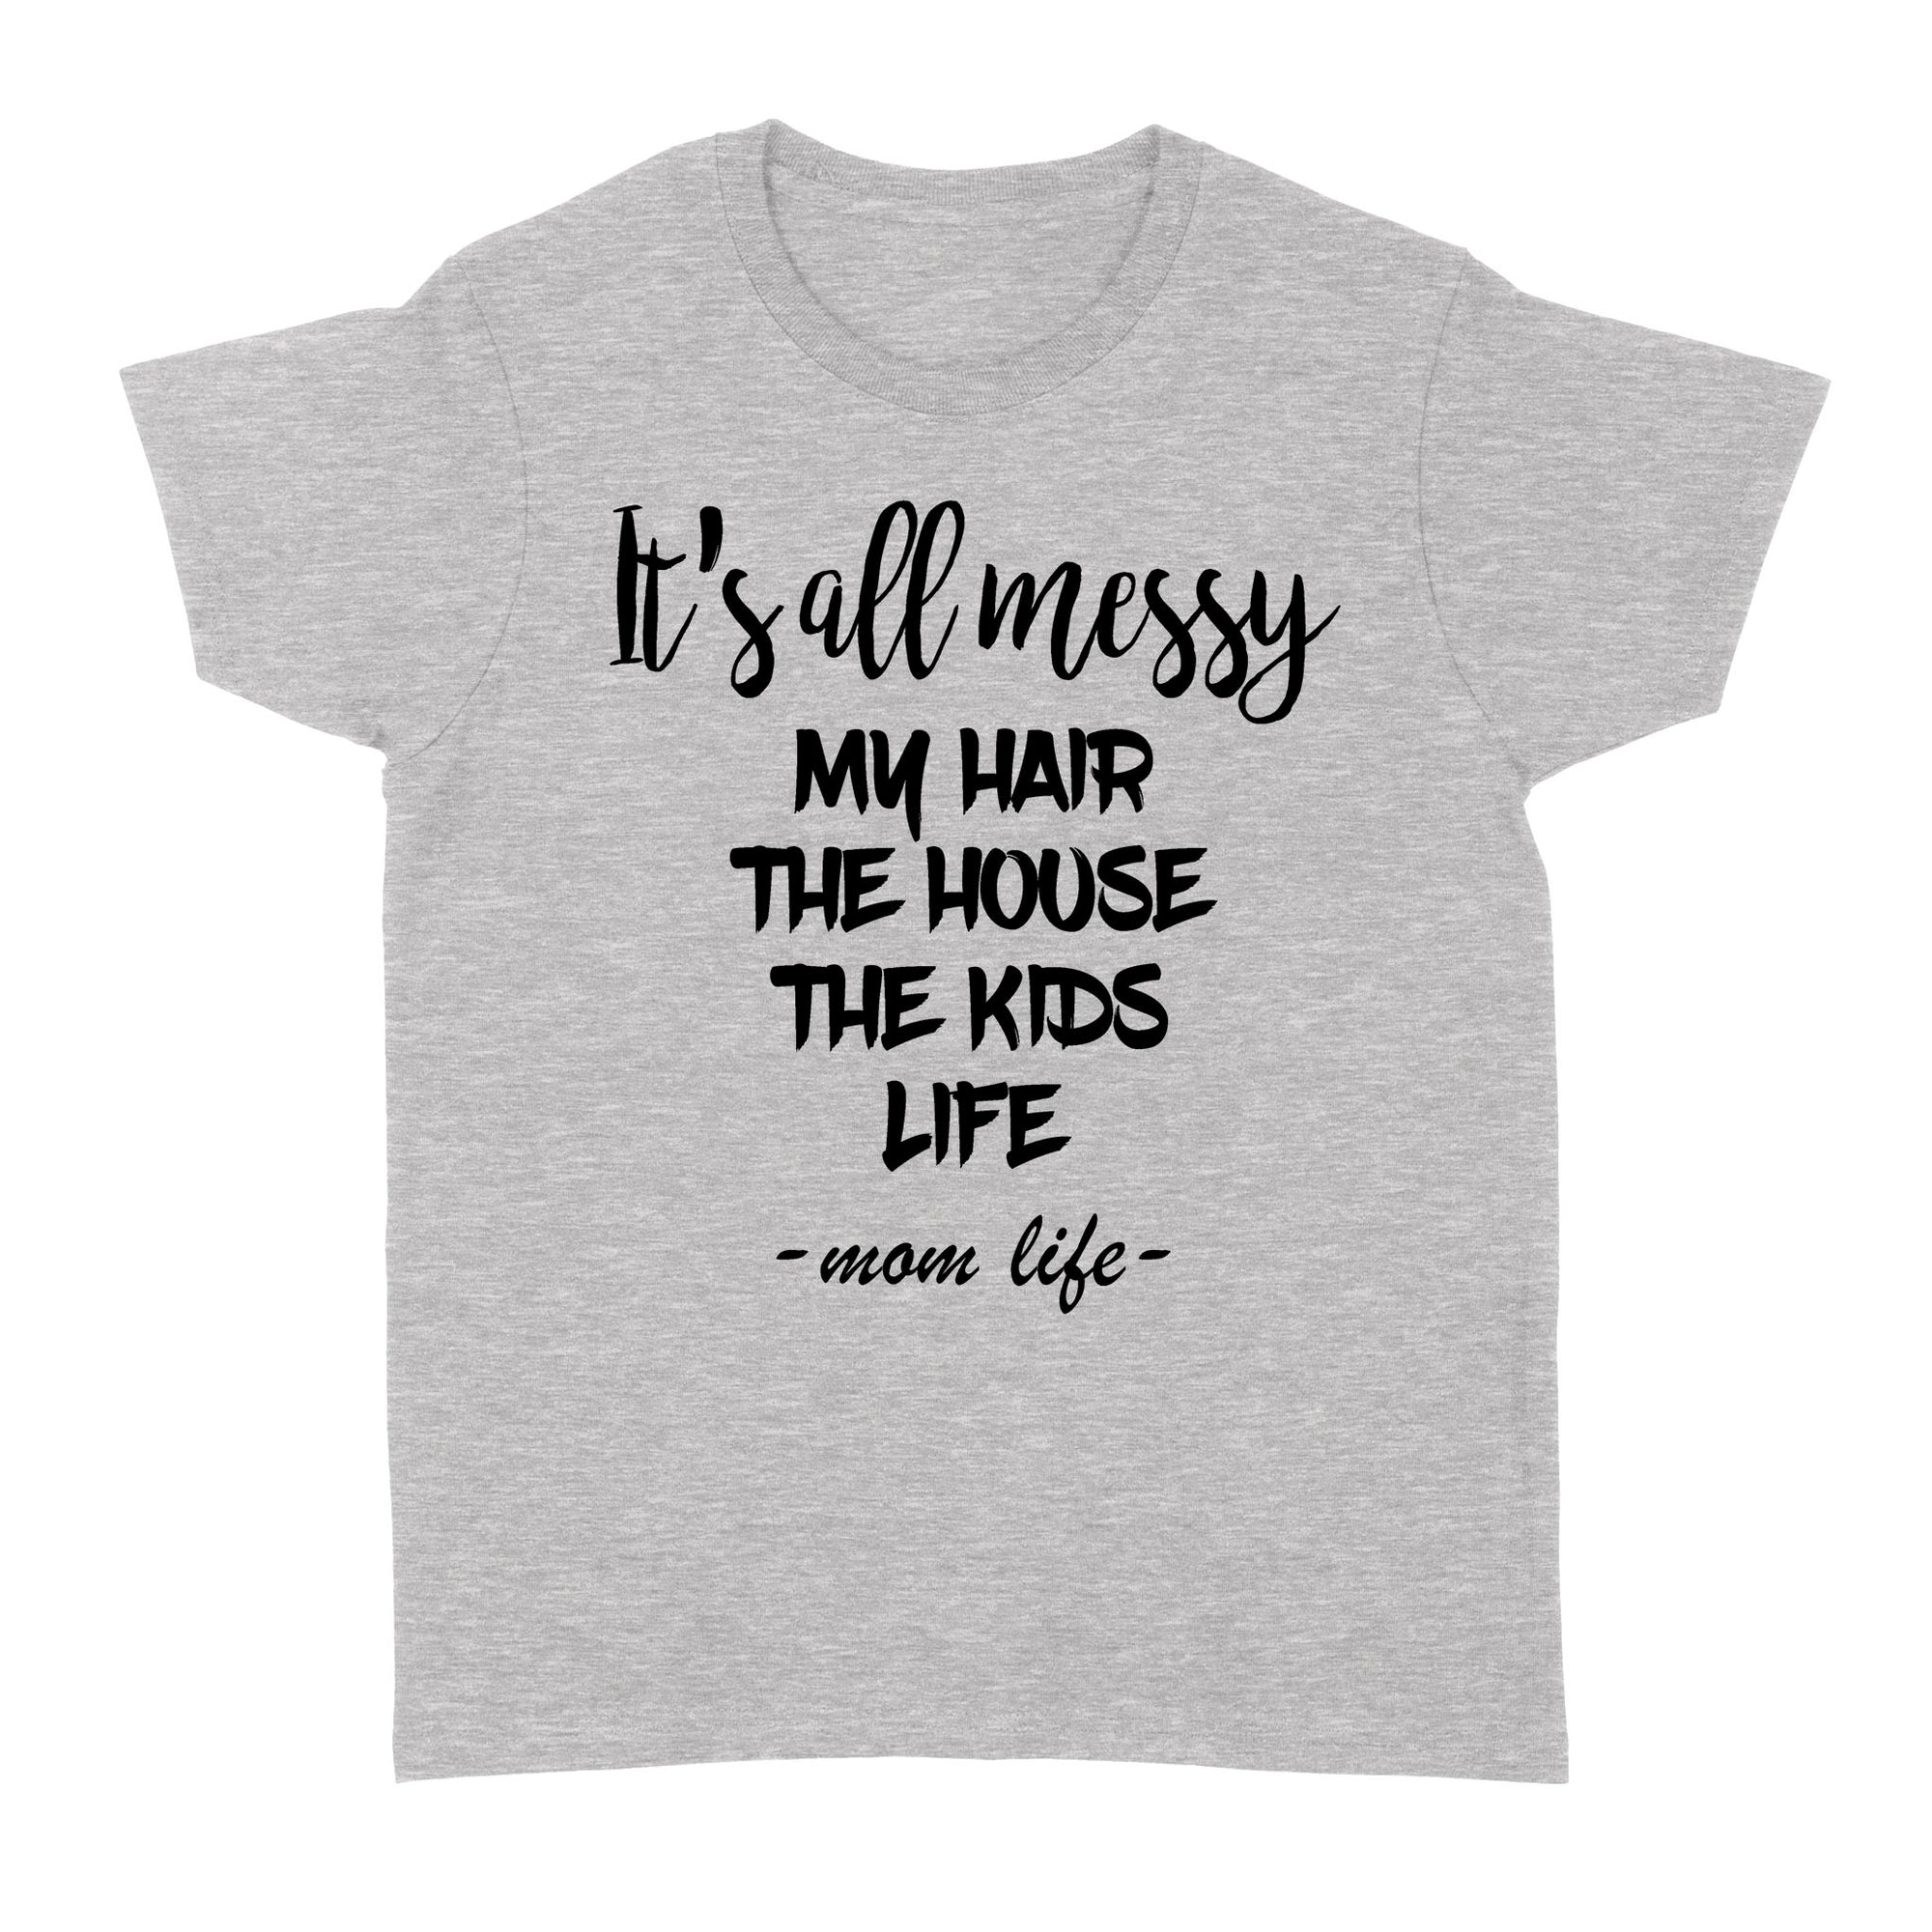 Gift Ideas for Mom Mothers Day It’s all Messy My Hair The House The Kids Life, Mom Life - Standard Women's T-shirt